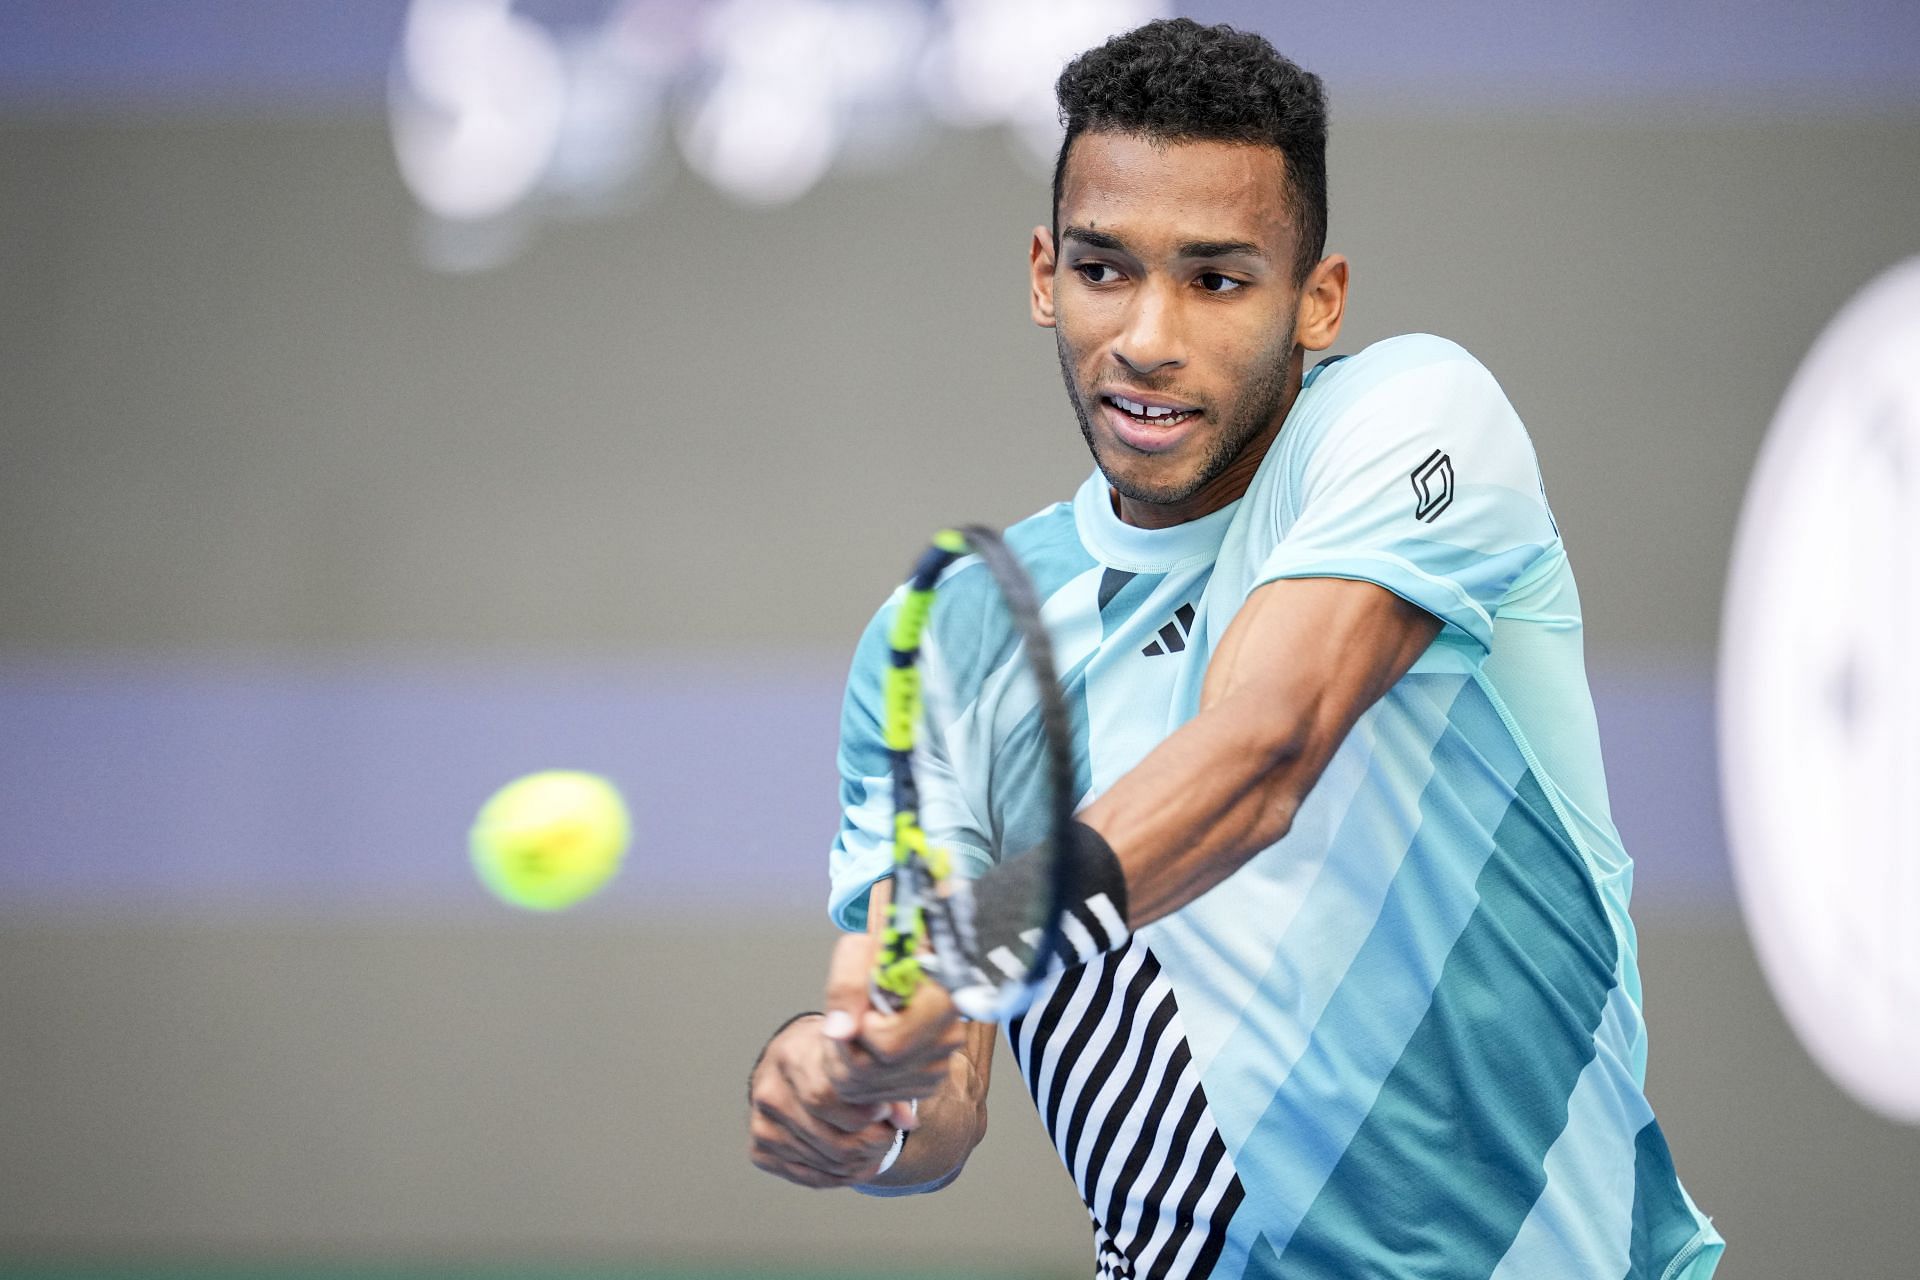 Felix Auger-Aliassime in action at the 2023 China Open